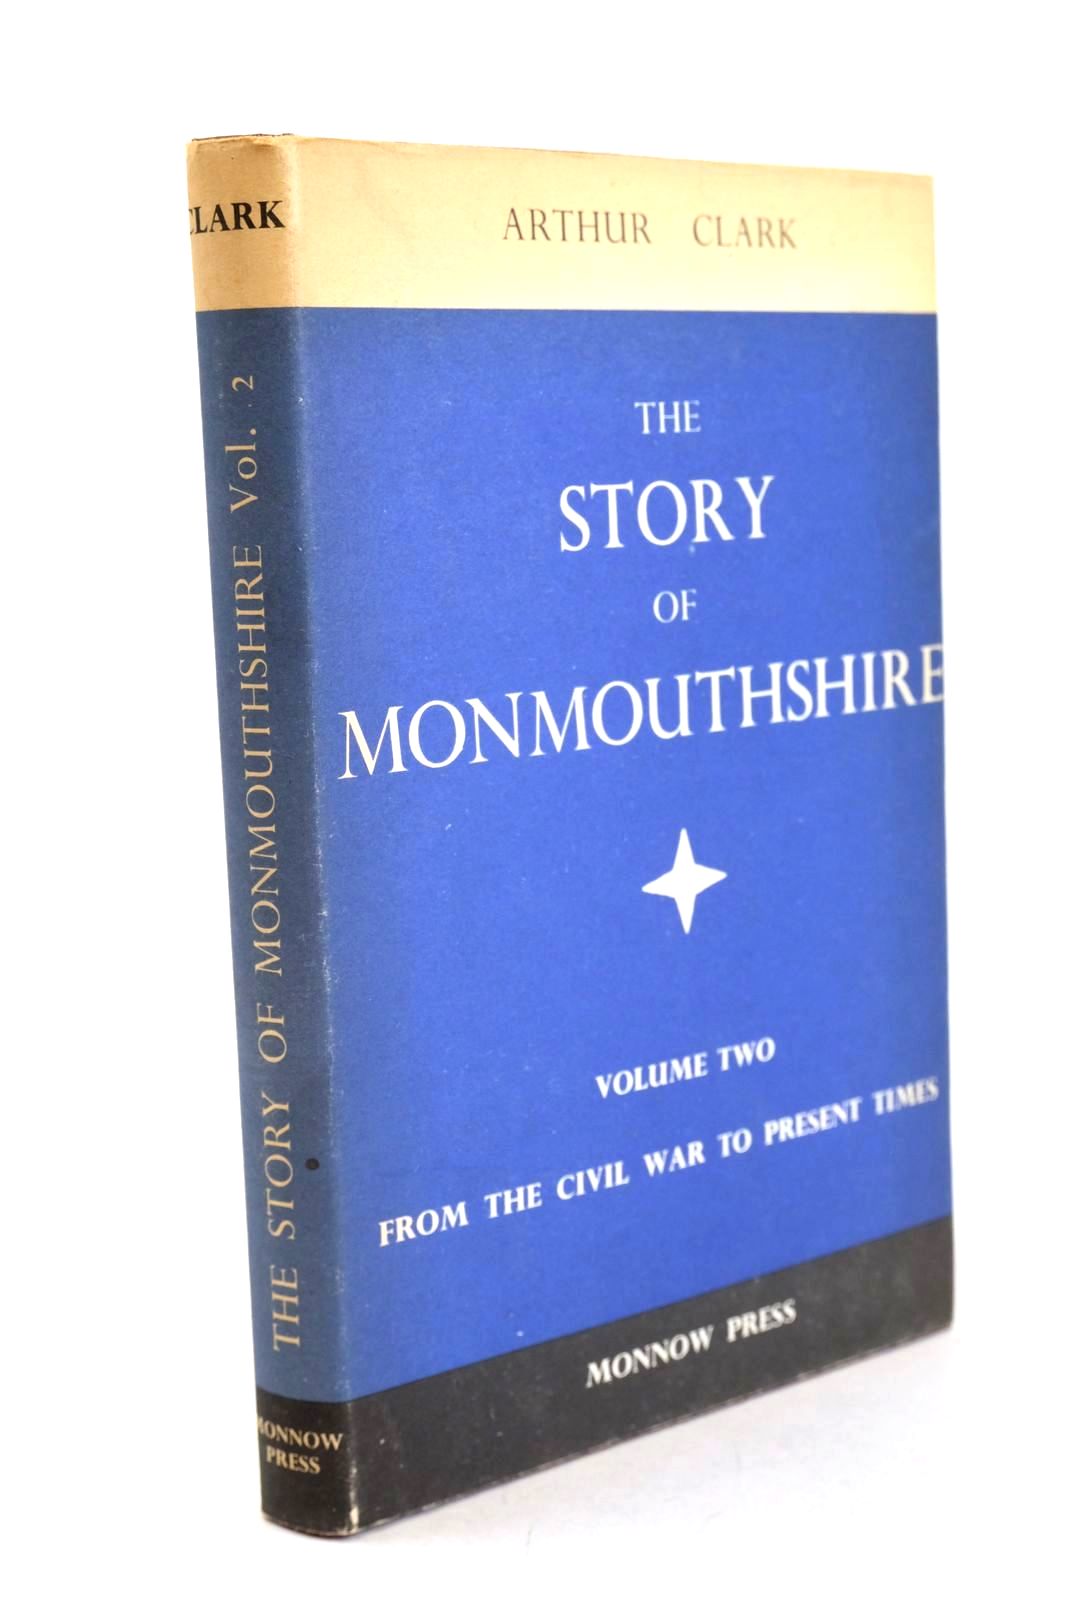 Photo of THE STORY OF MONMOUTHSHIRE VOLUME TWO written by Clark, Arthur published by Monnow Press (STOCK CODE: 1327302)  for sale by Stella & Rose's Books